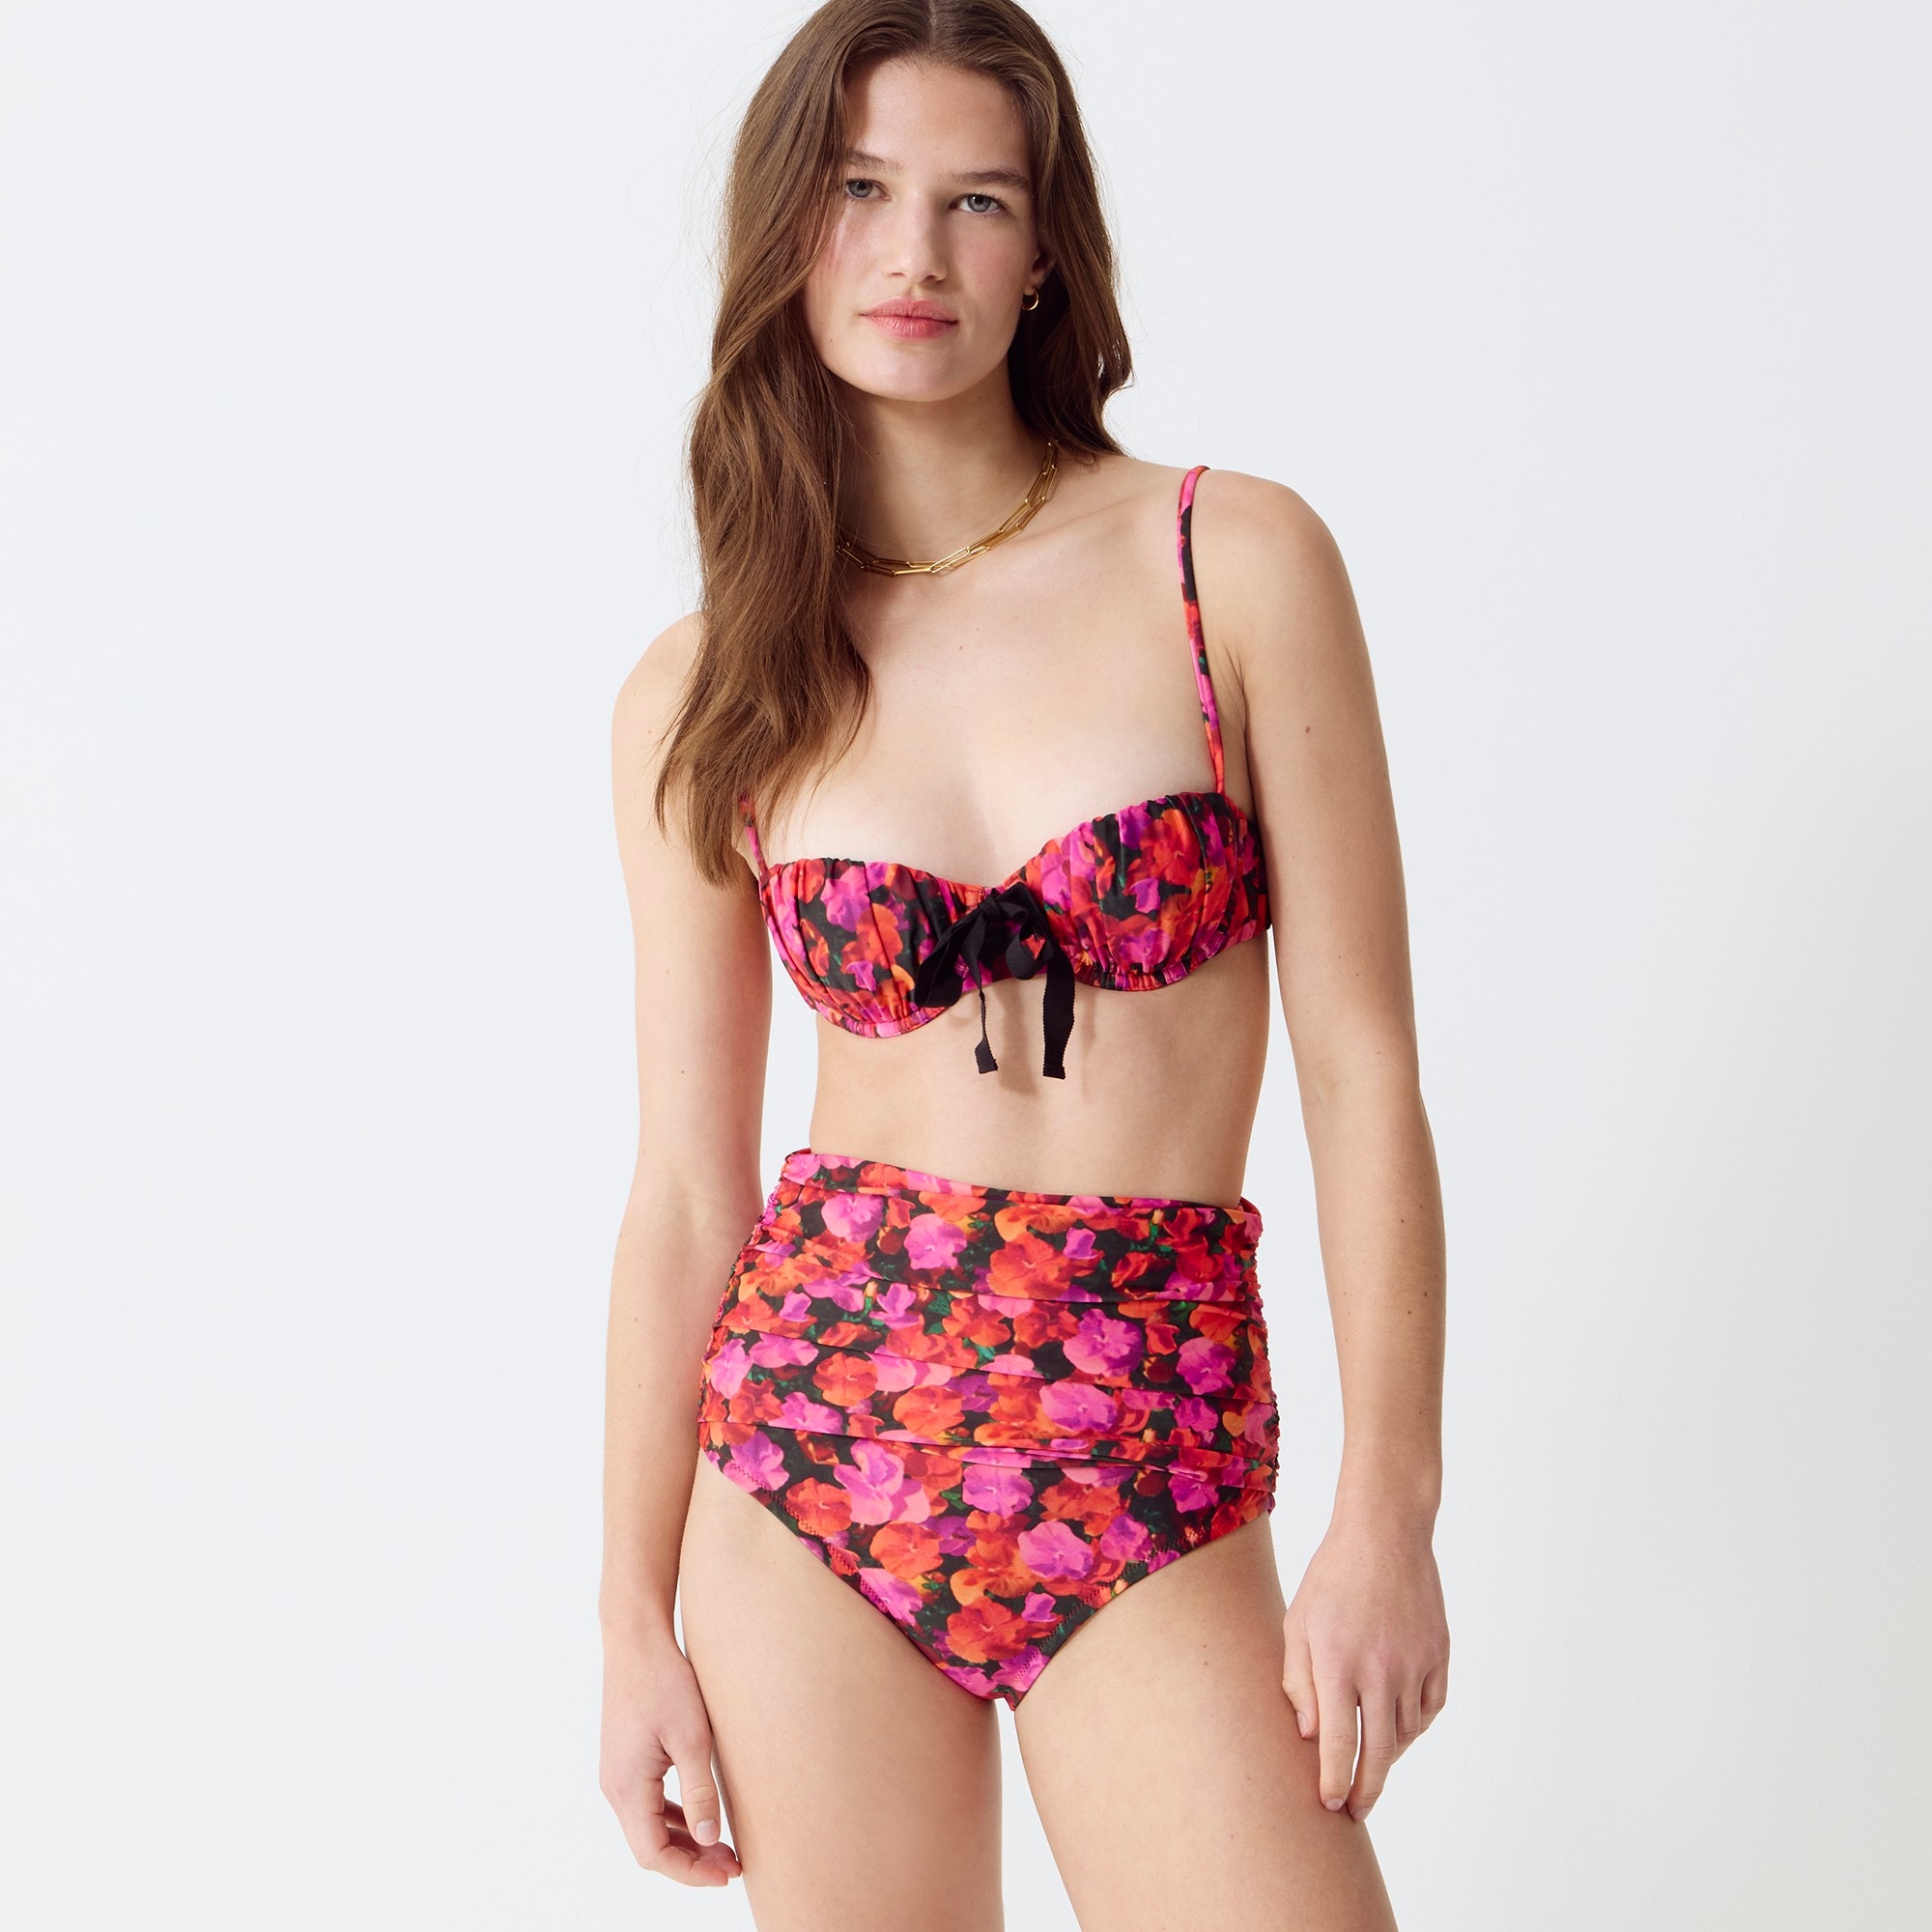  Ruched balconette bikini top in pansy floral